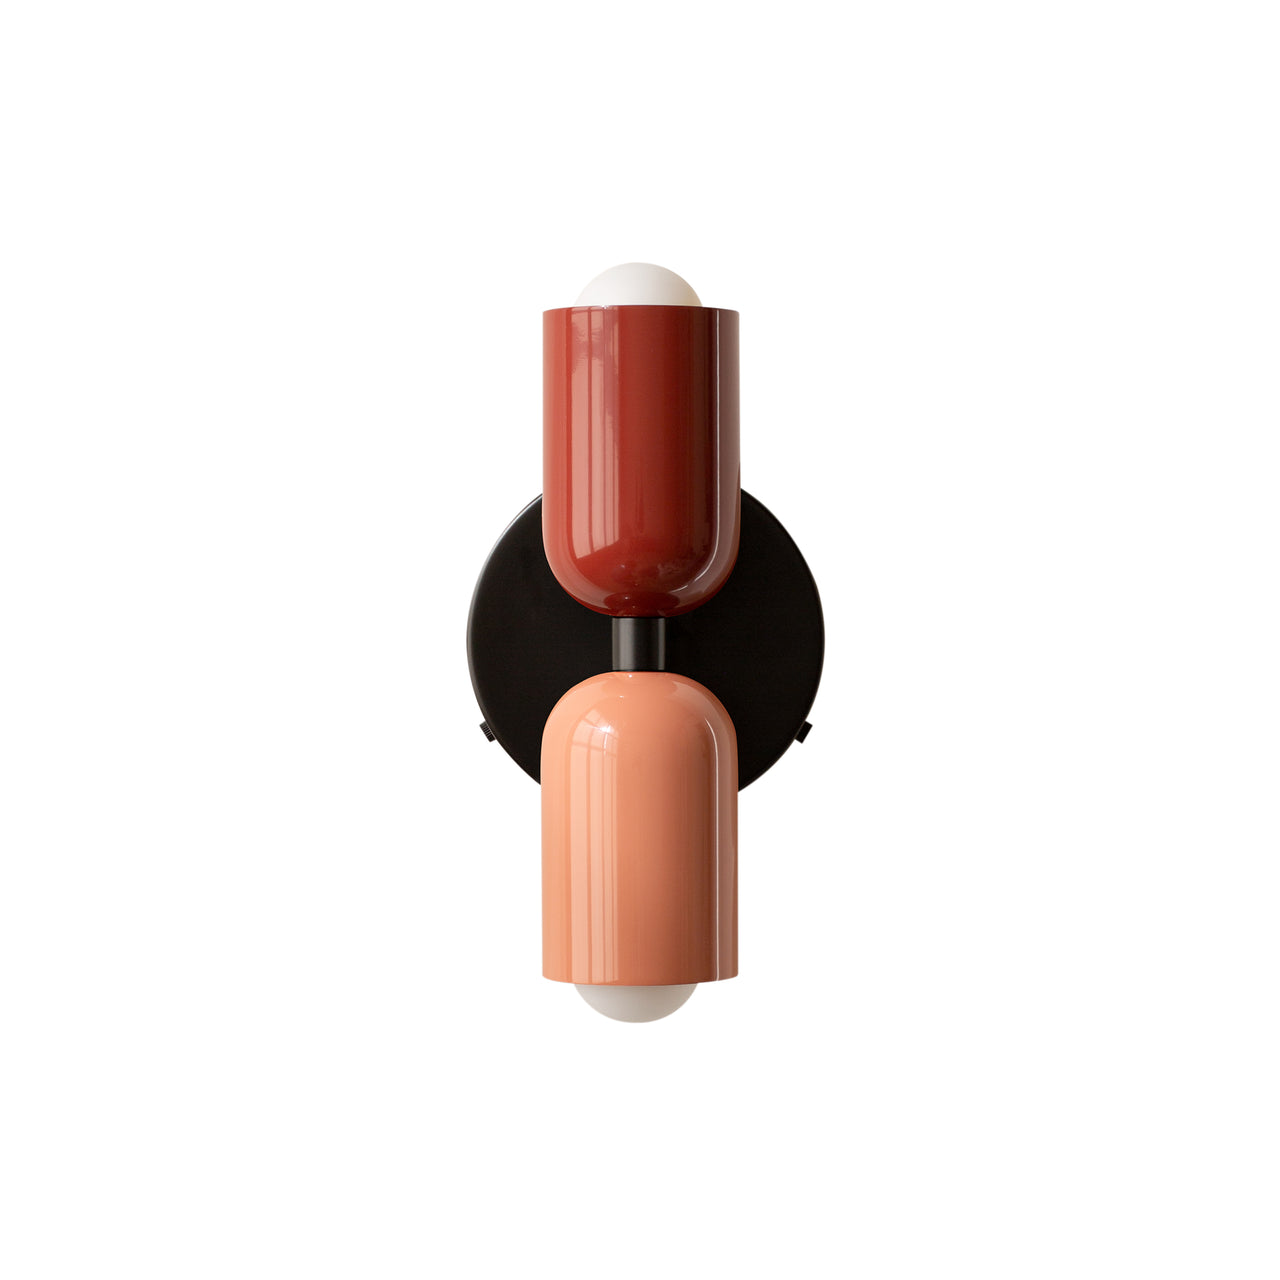 Up Down Sconce: Duo-Tone + Oxide Red + Peach + Hardwire